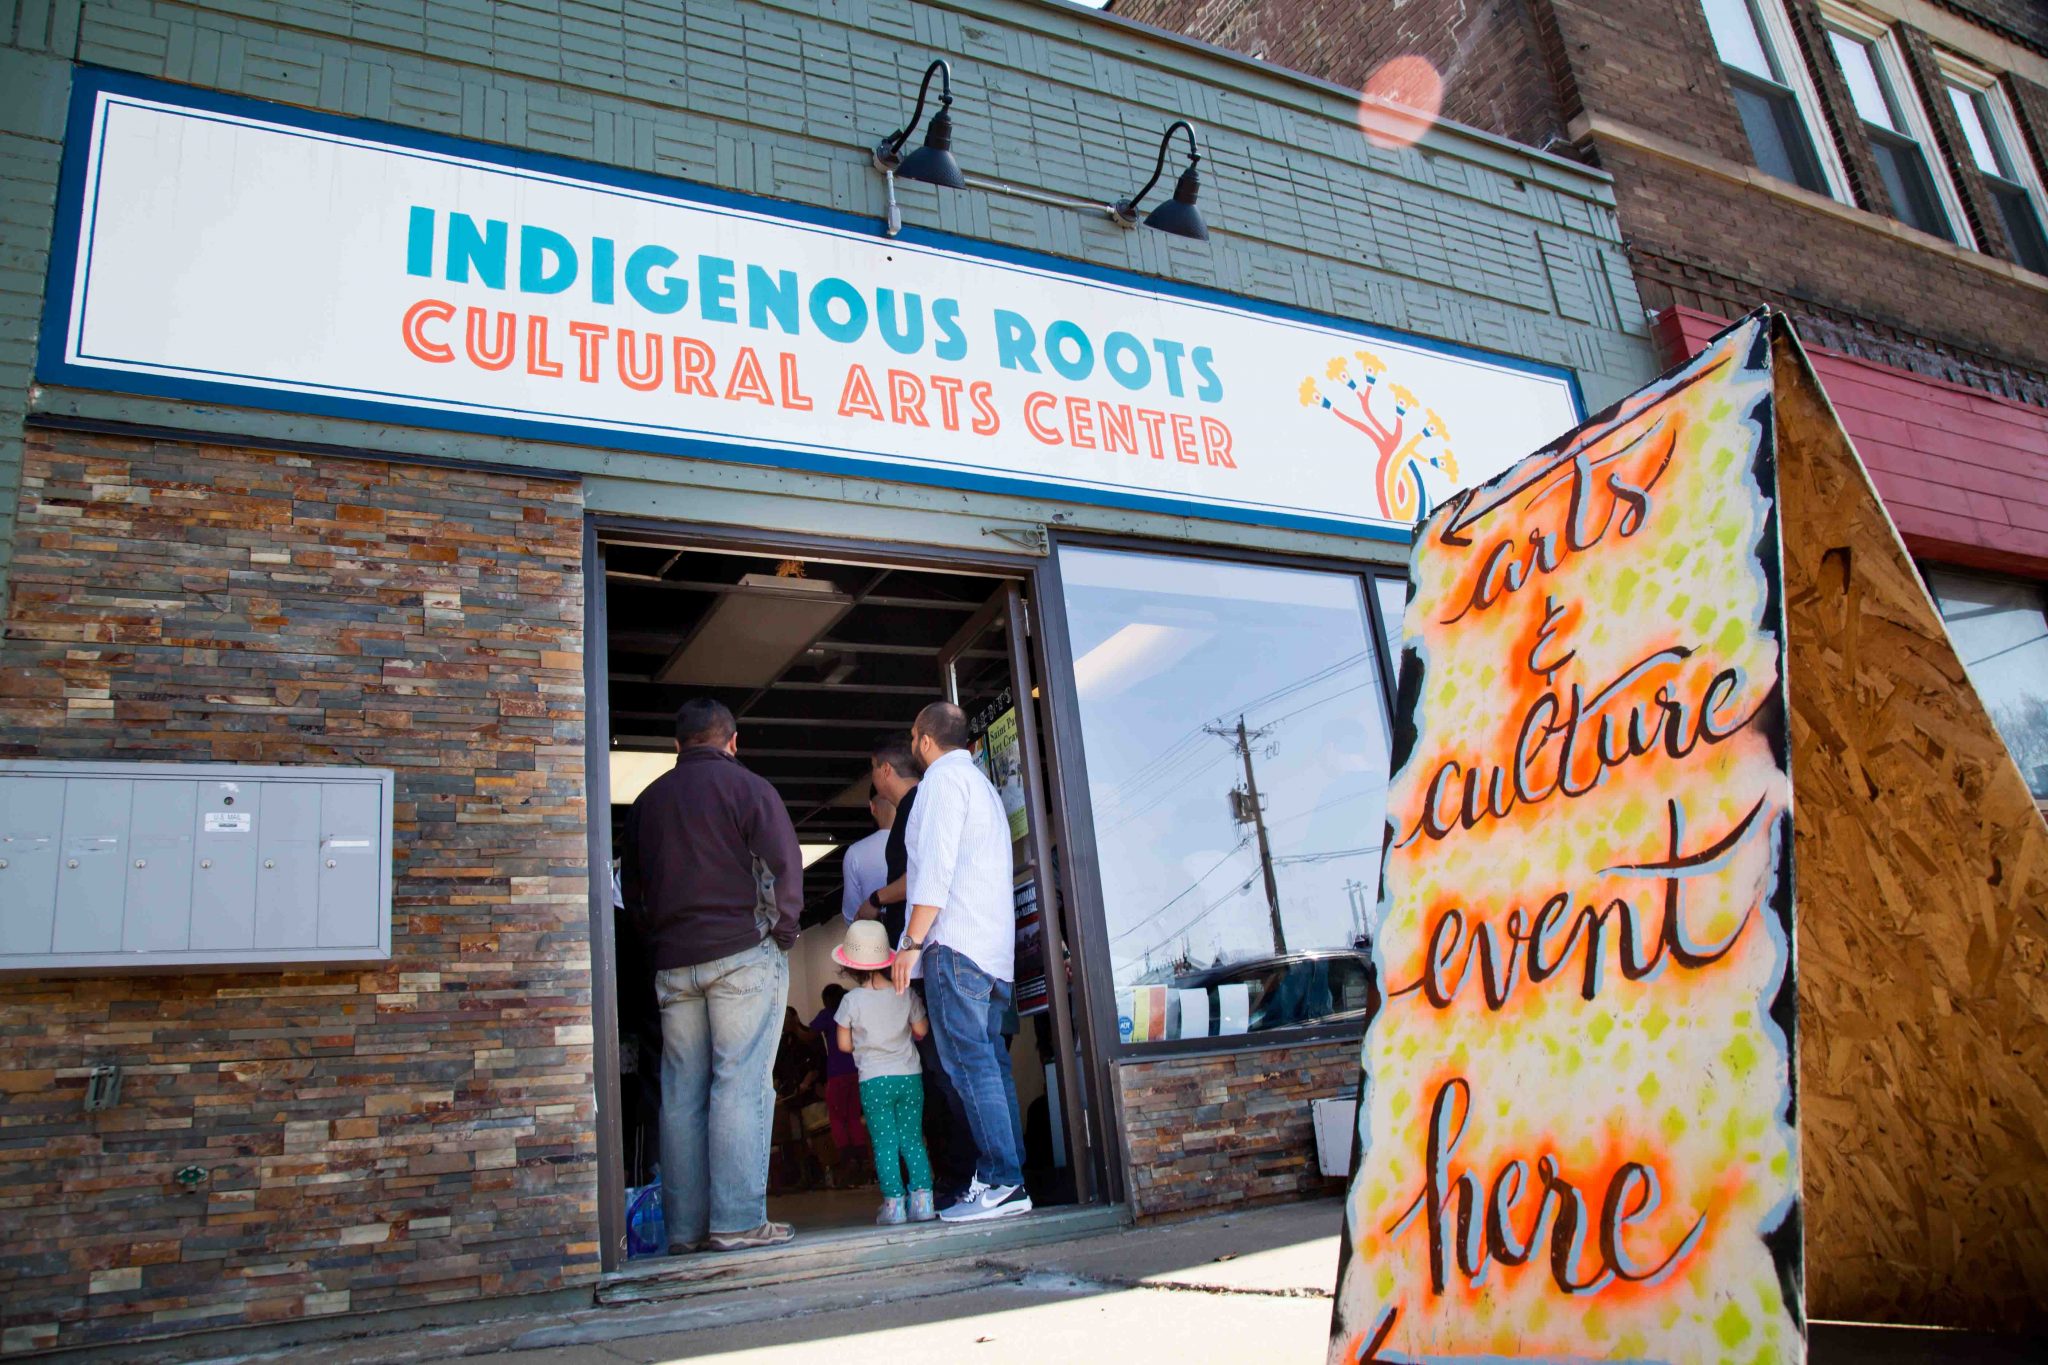 A group of people enter the Indigenous Roots Cultural Arts Center for an event